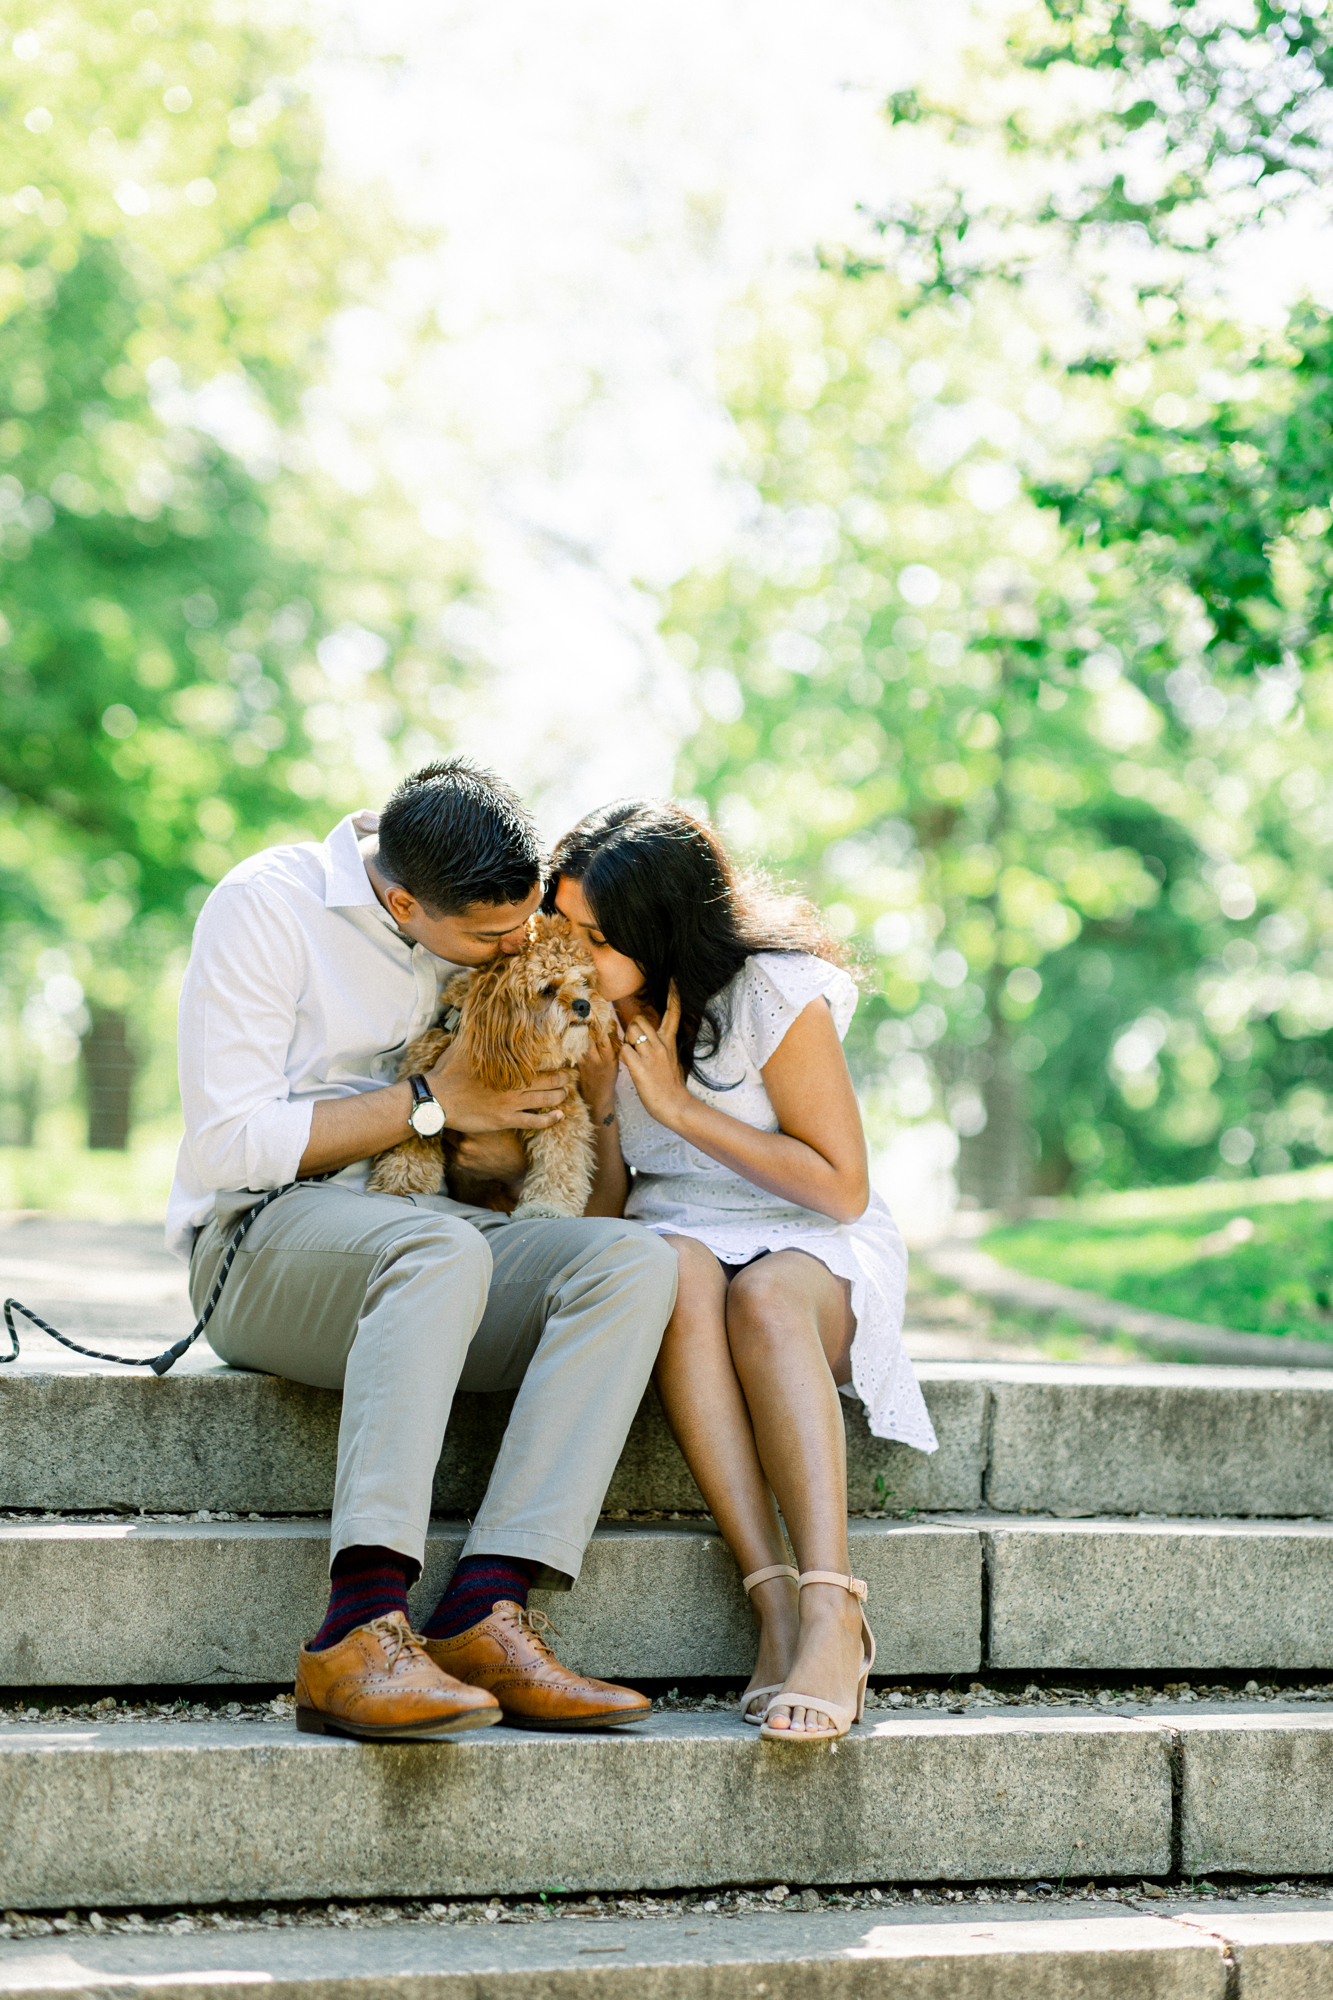 Special Carl Shurz Park Engagement Photos in Summery NYC